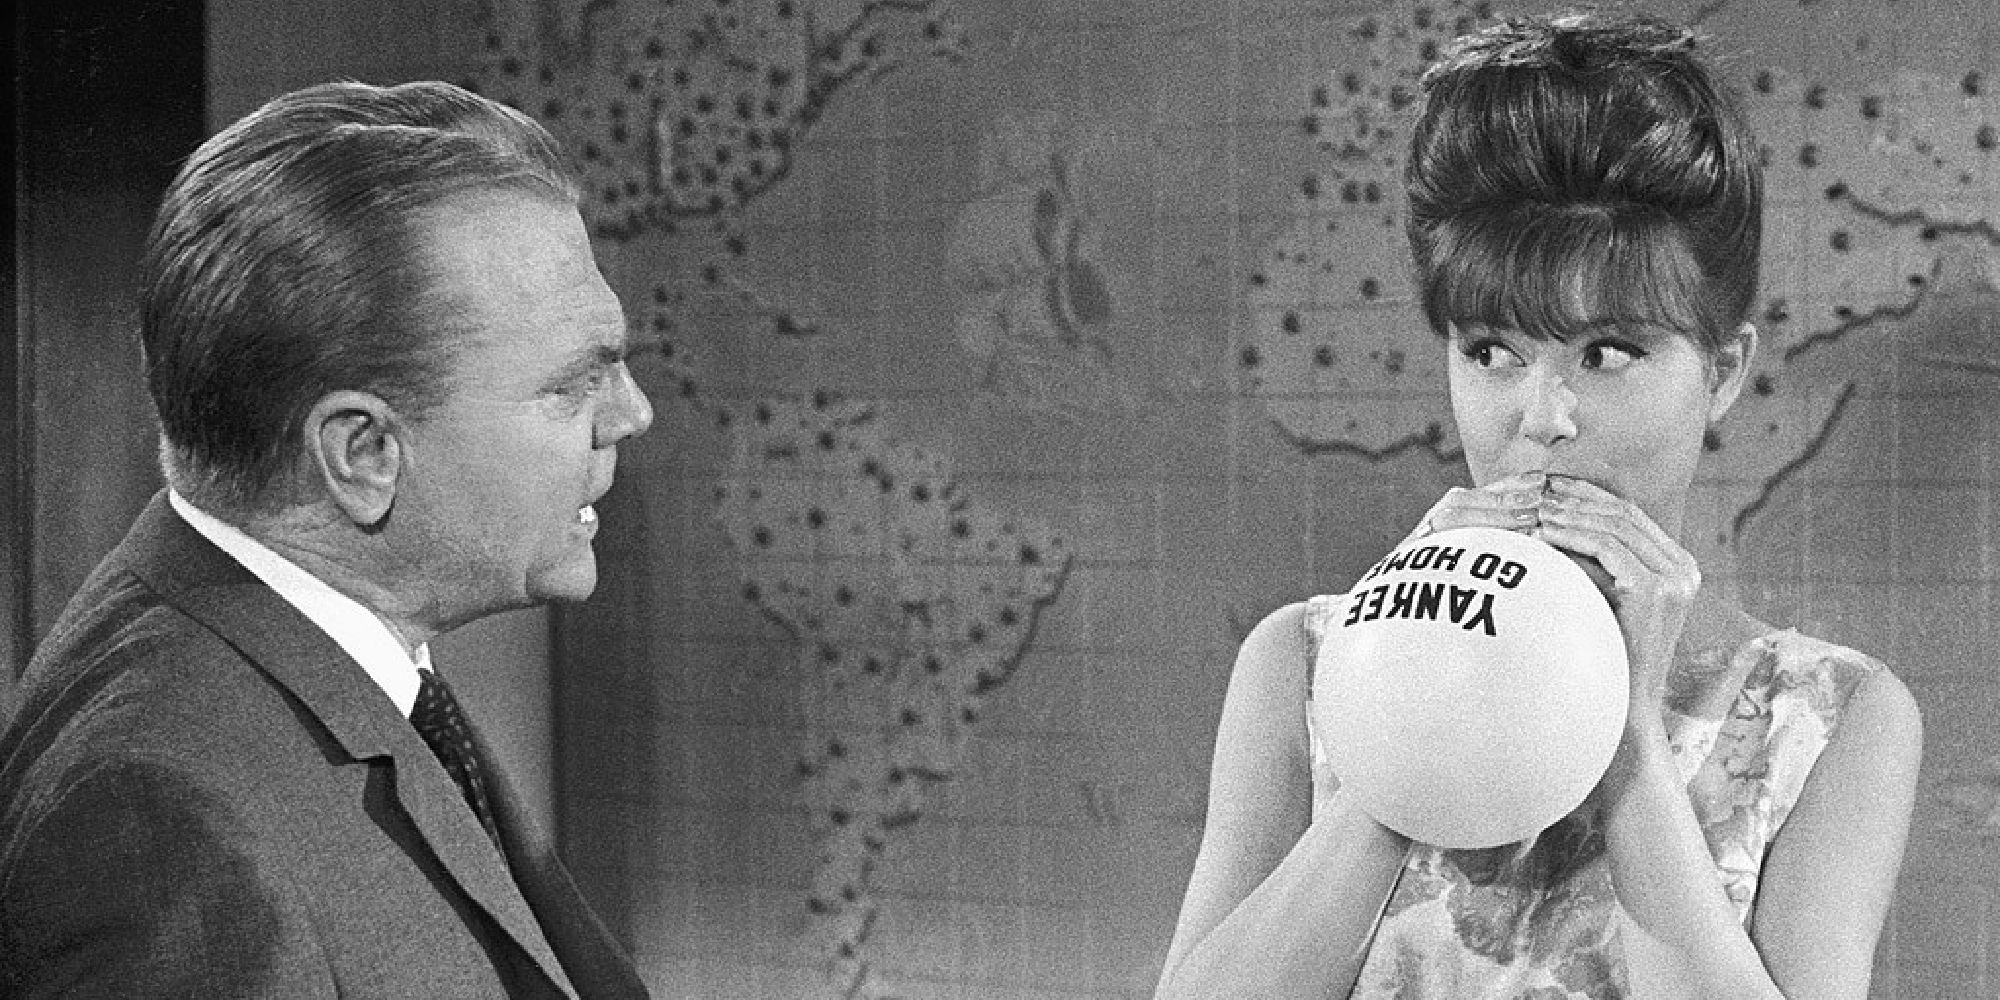 James Cagney and Pamela Tiffin in One, Two, Three - 1961